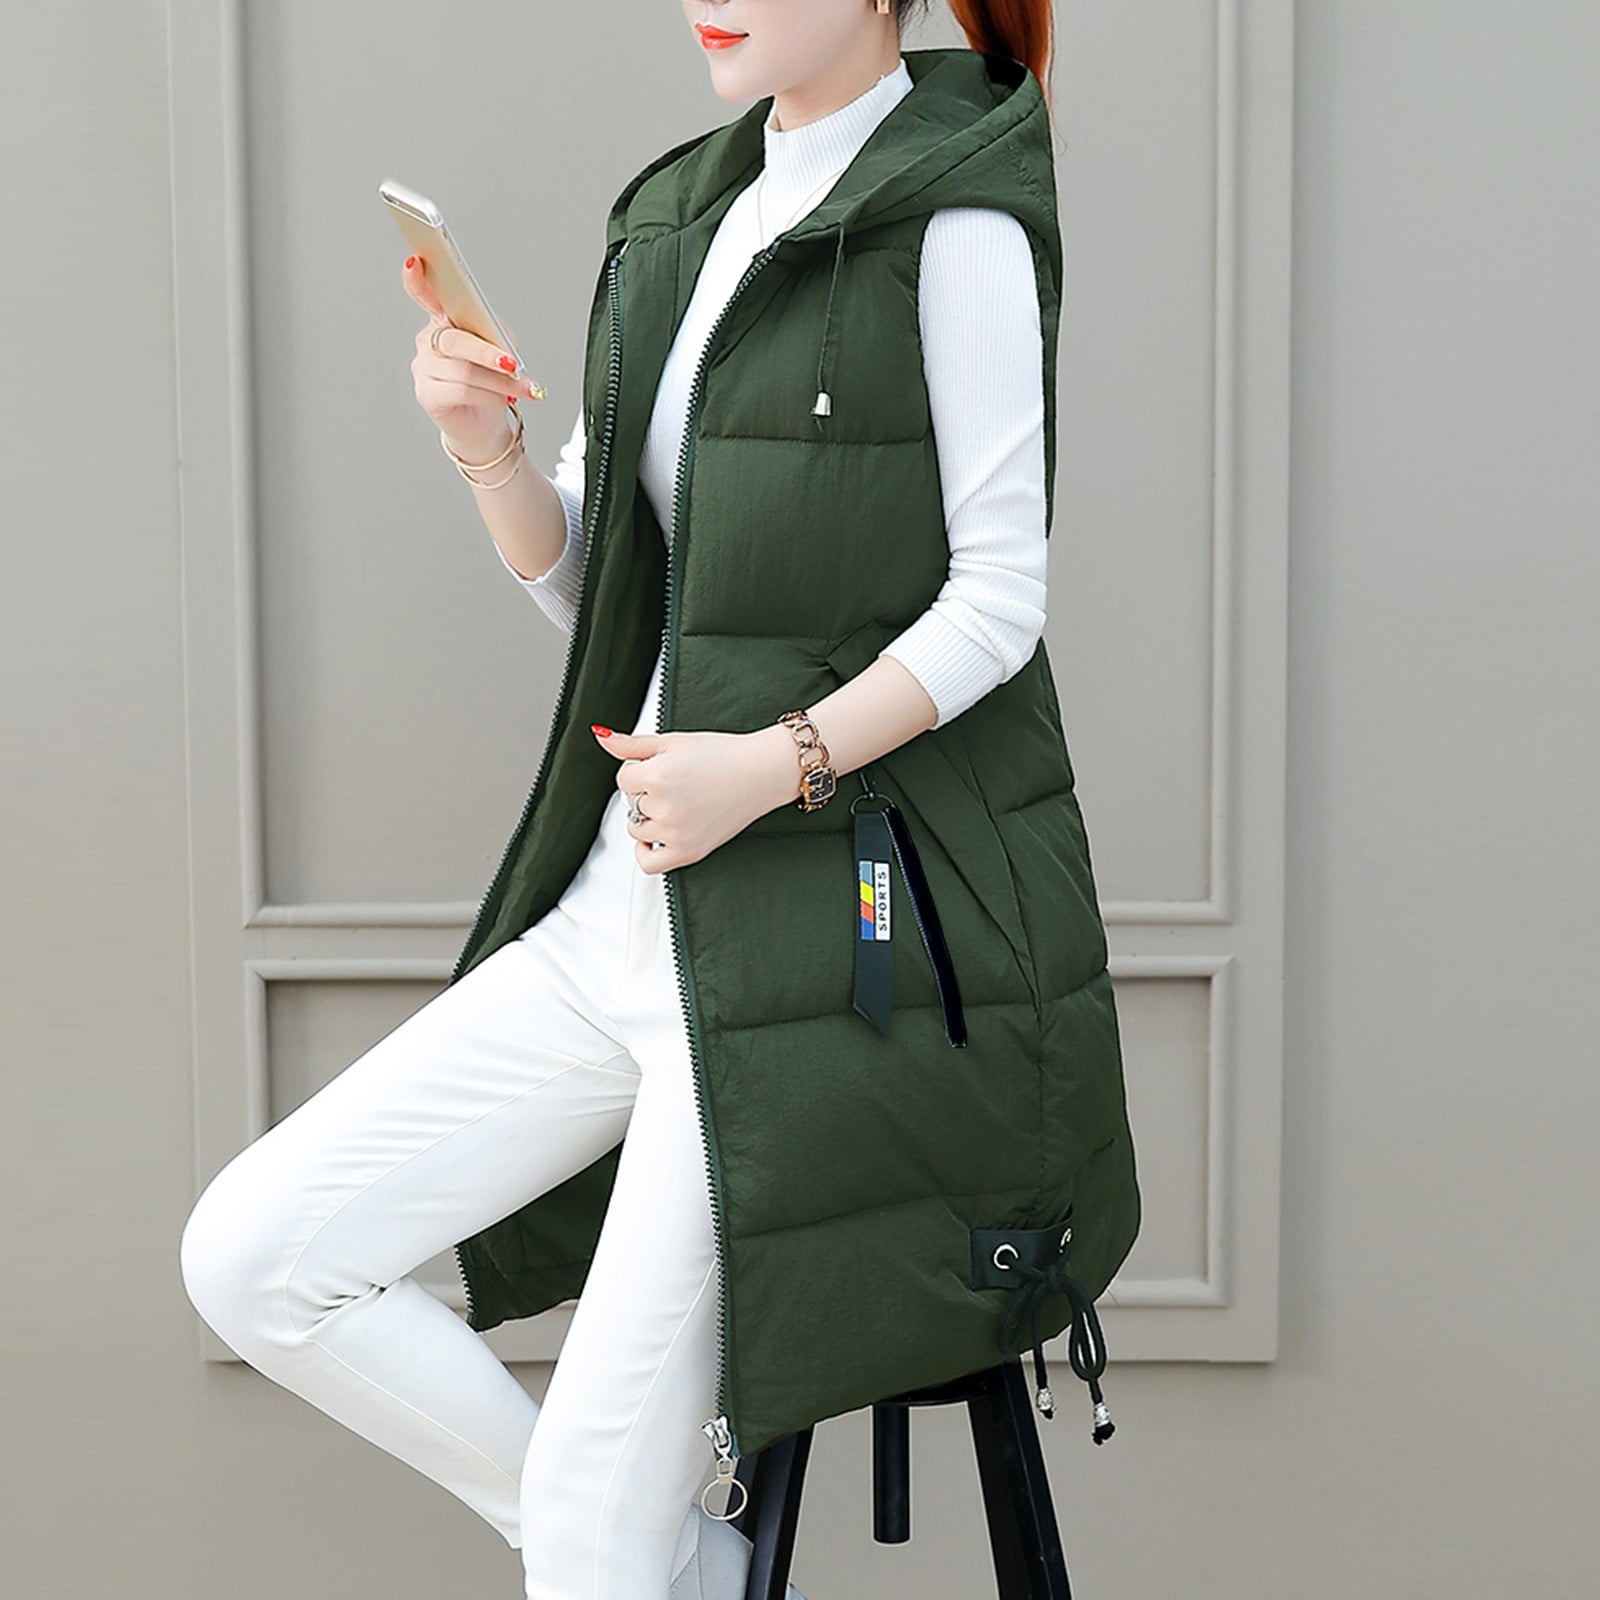 CAICJ98 Womens Fall Fashion 2023 Women 'S Quilted Puffer Vest Thicken Warm  Winter Coat with Removable Hood Grey,XL